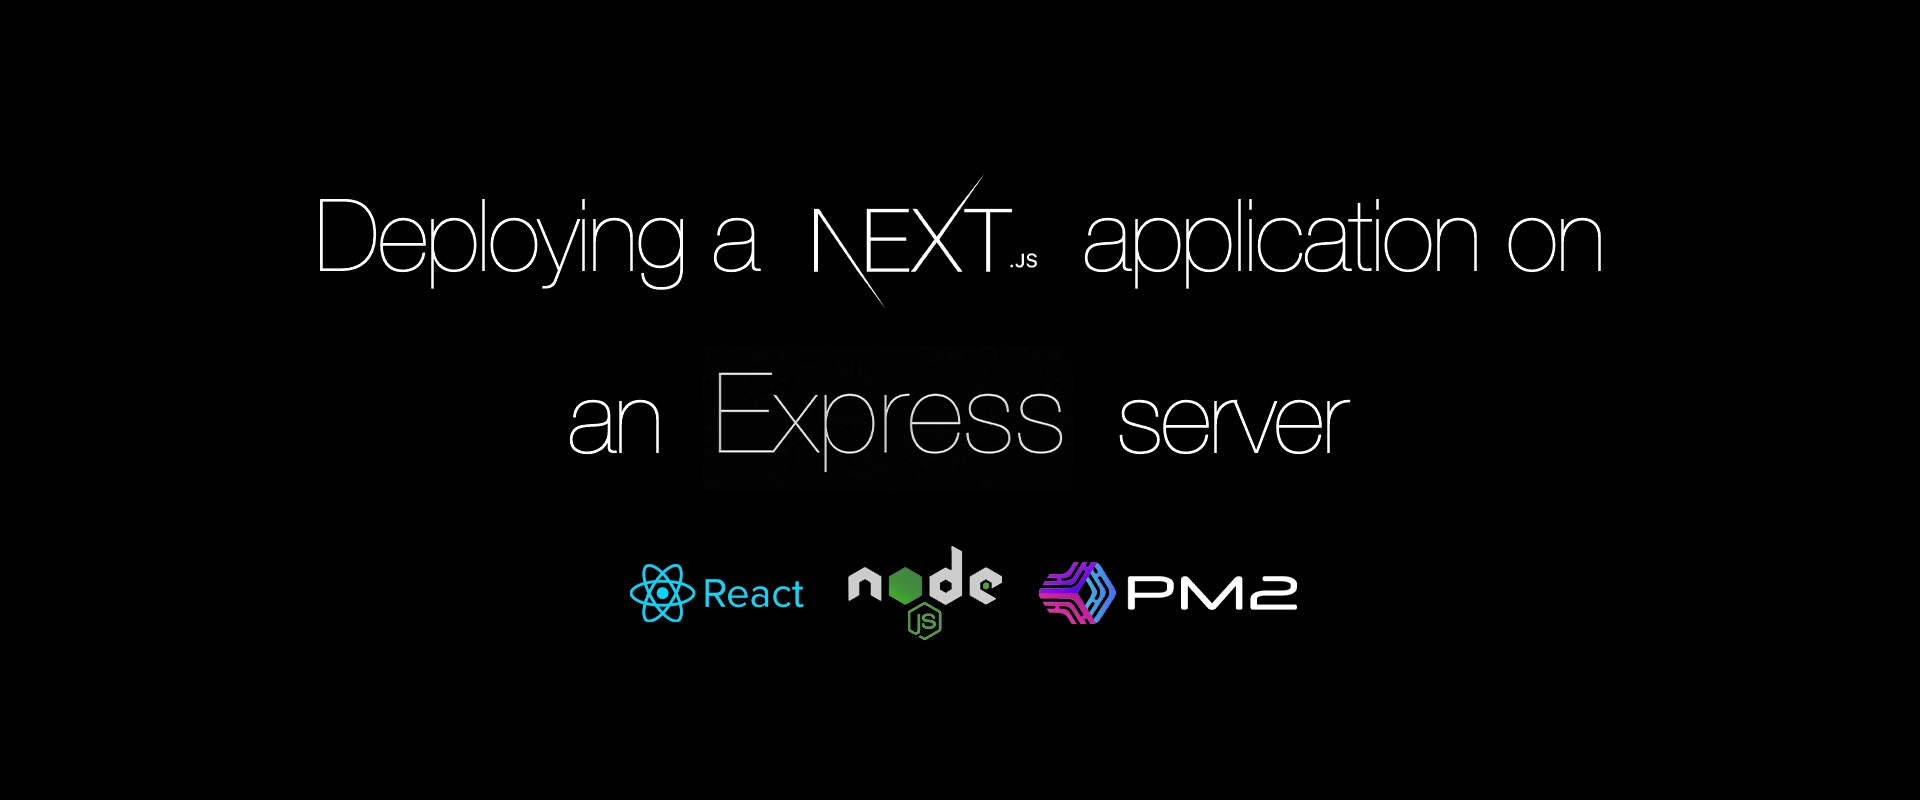 Cover image for Deploying a Next.js Application on Express